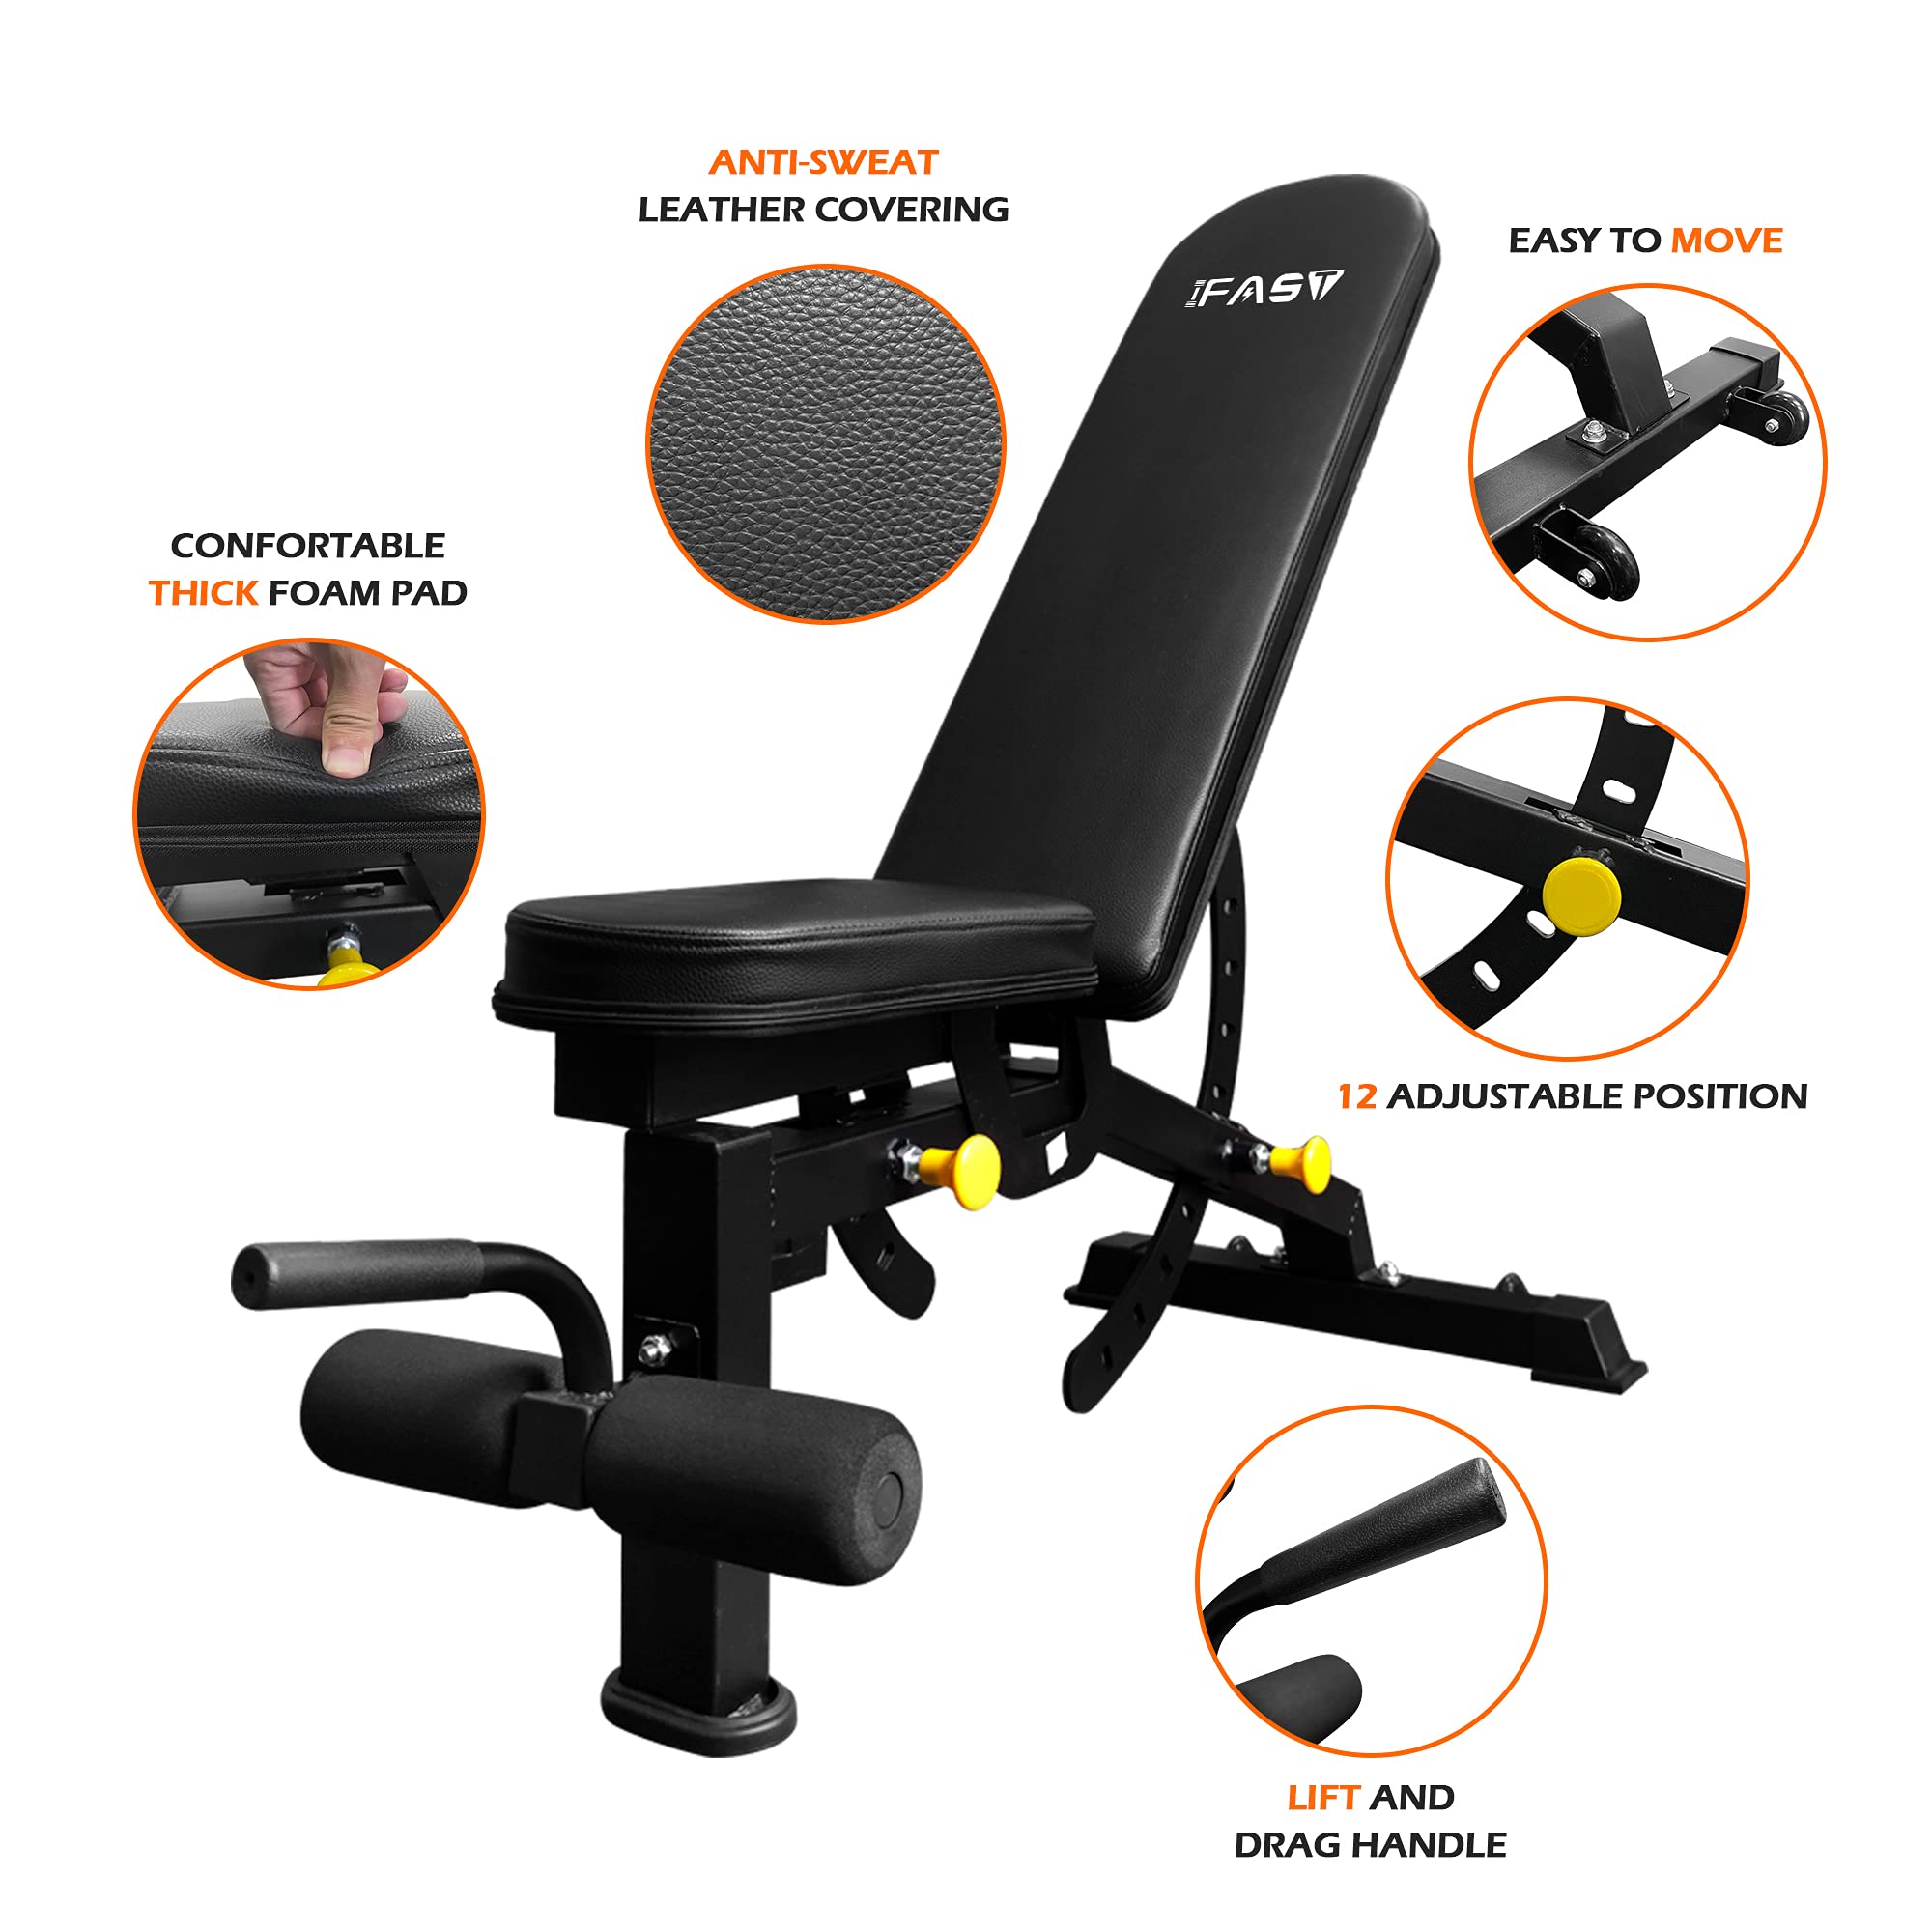 IFAST adjustable weight bench